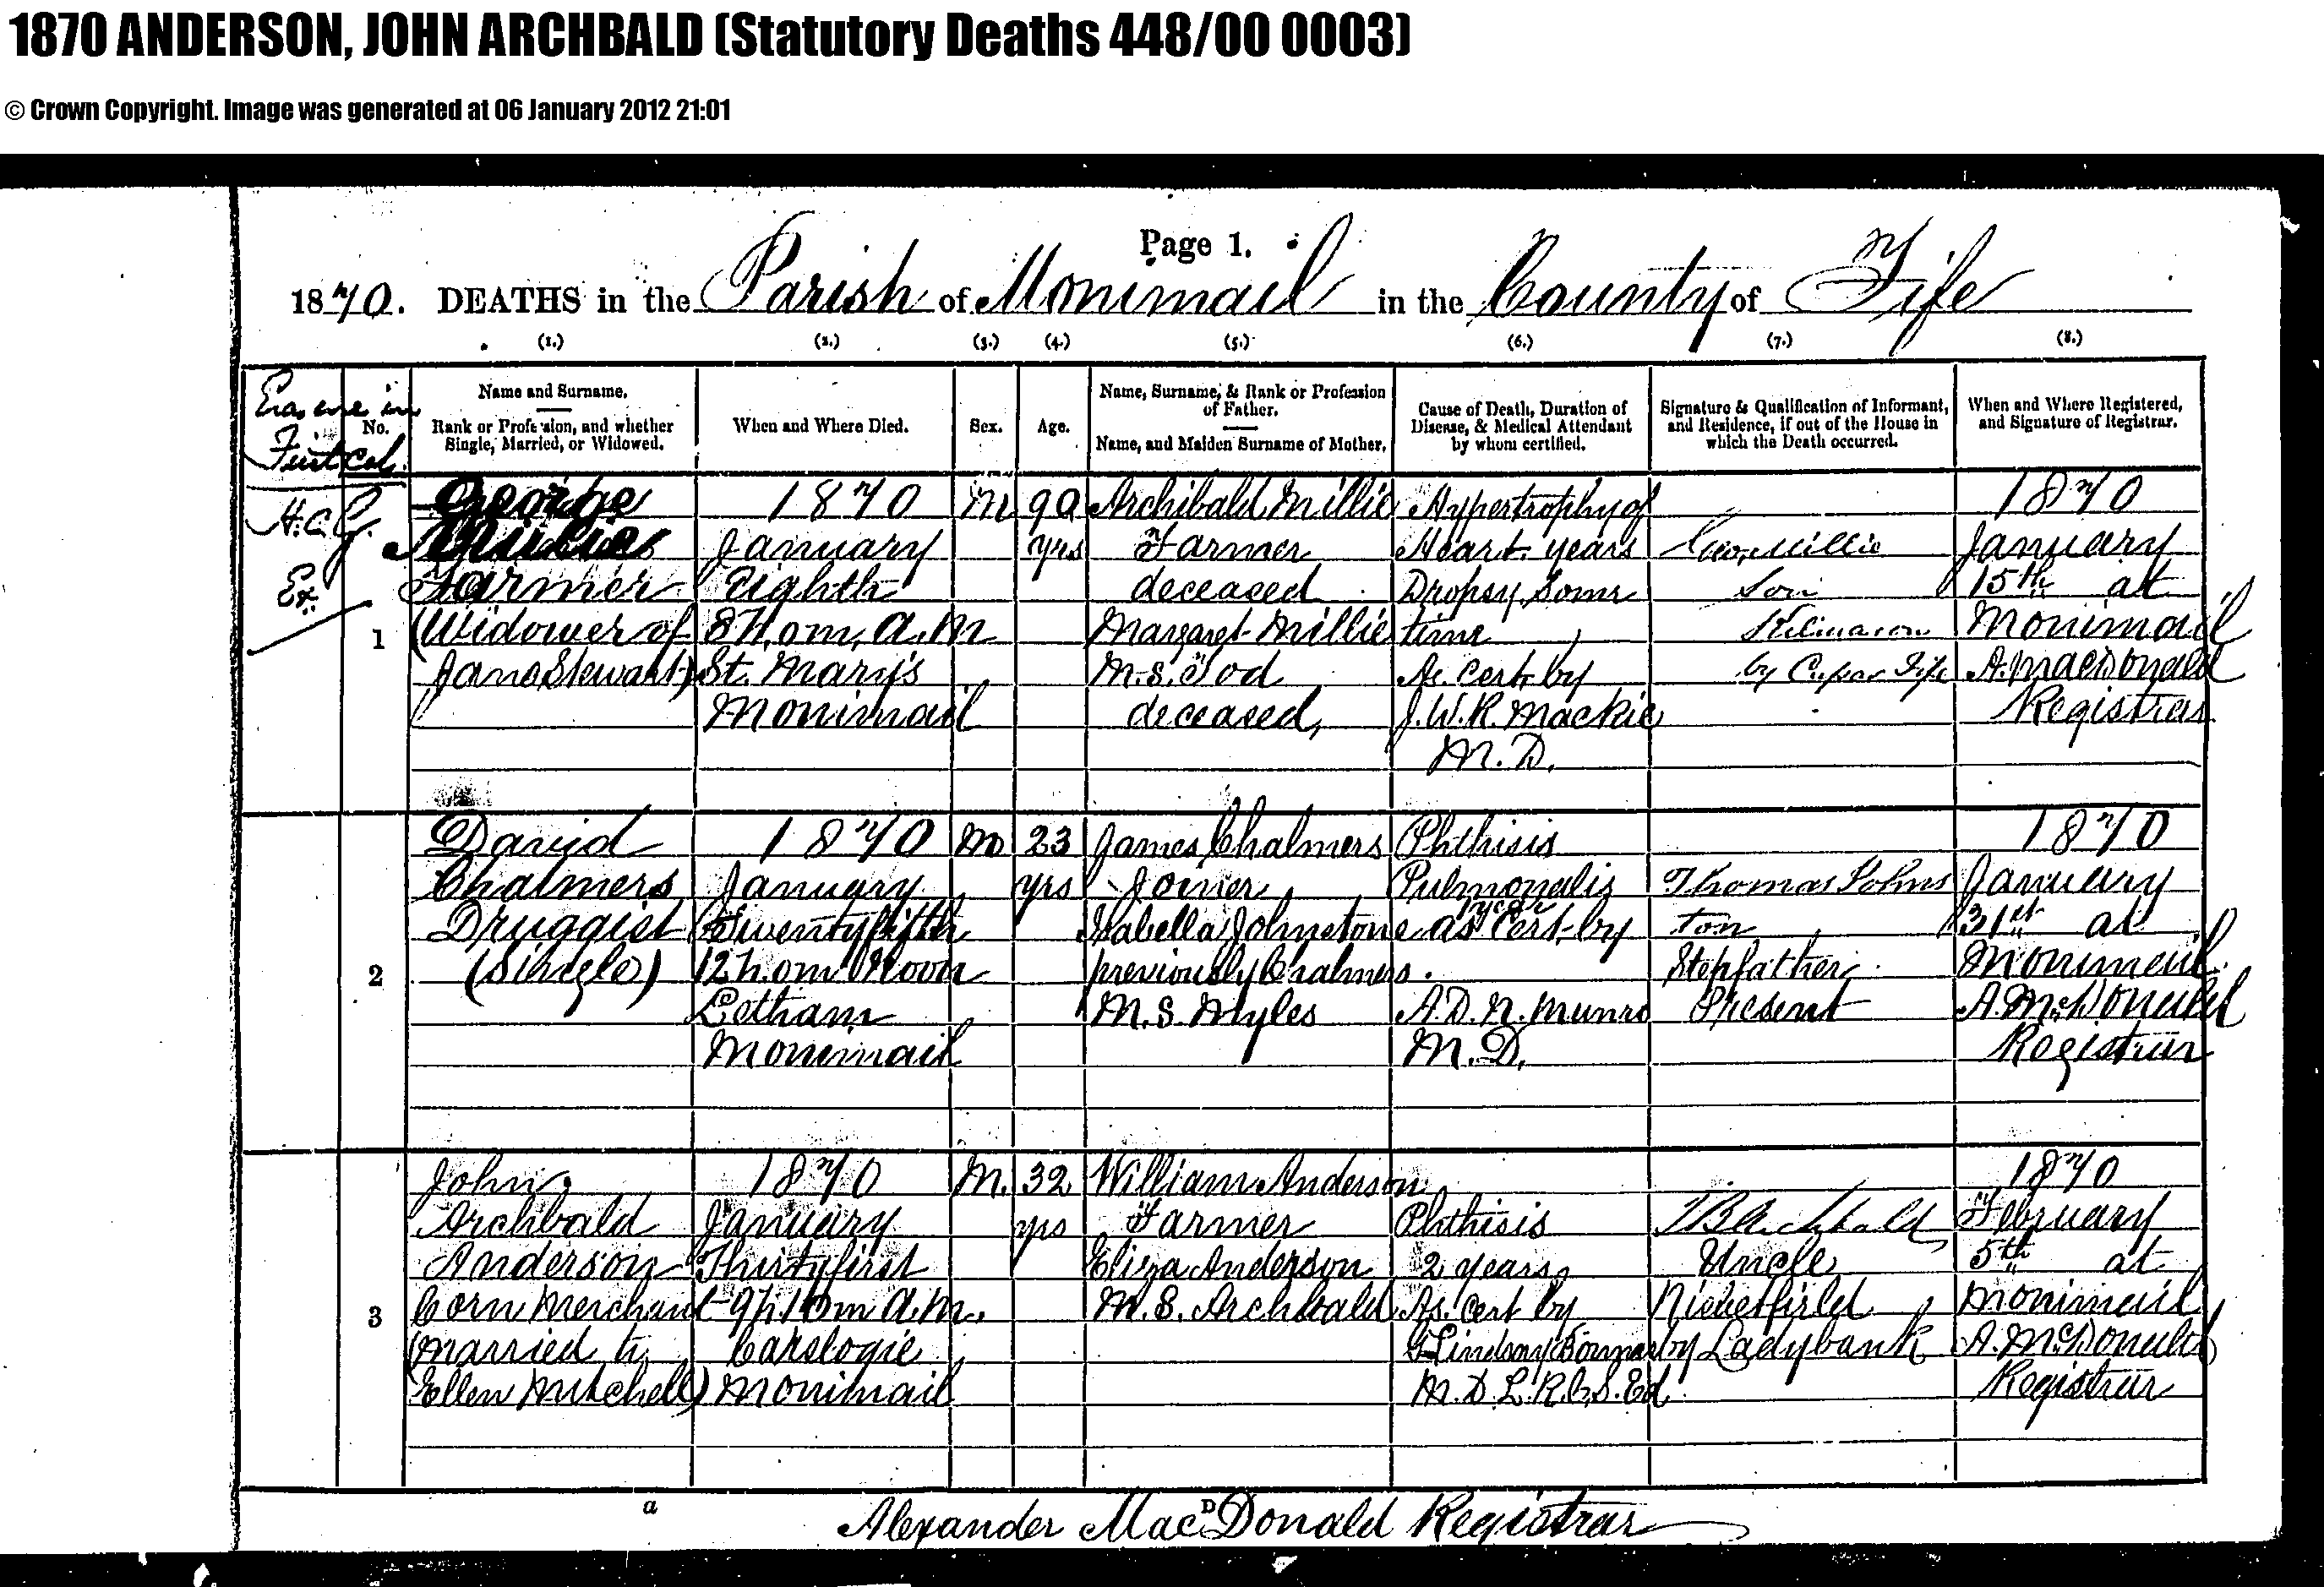 Example of  a post 1855 Scottish Statutory Death Register page and entries.